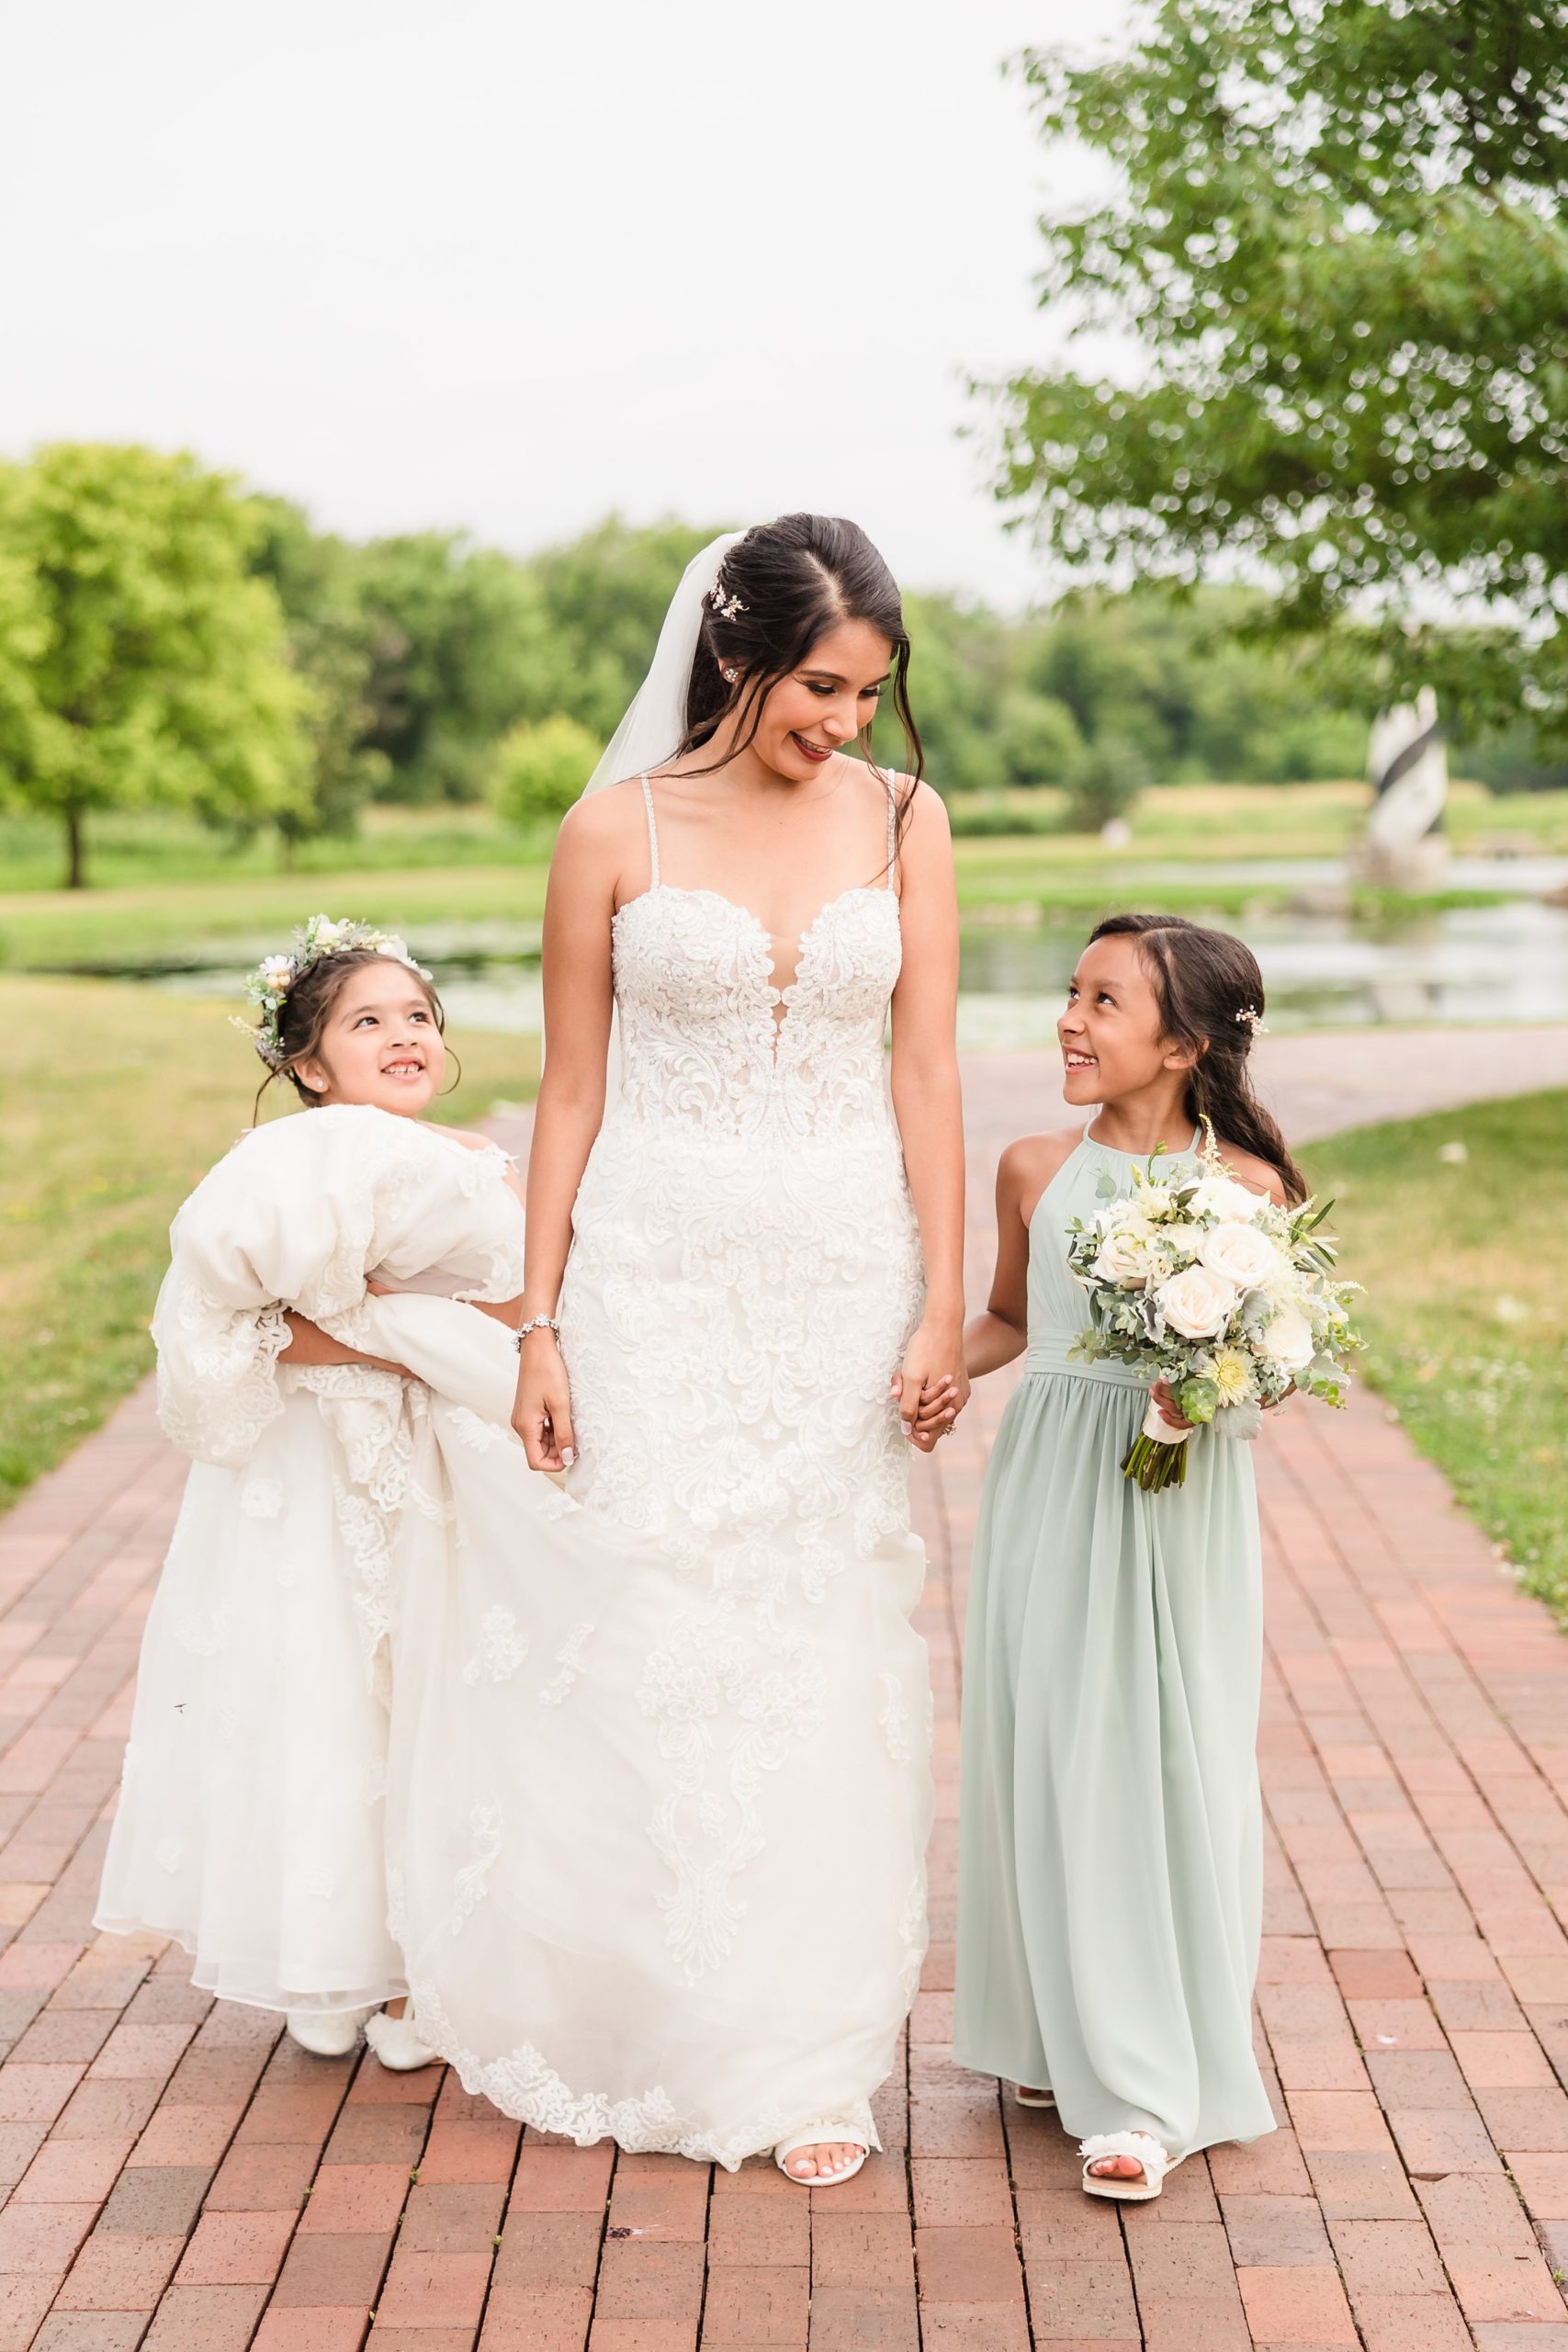 Bride walks with her flower girls during her wedding at the Fisherman's Inn in Elburn, Illinois.